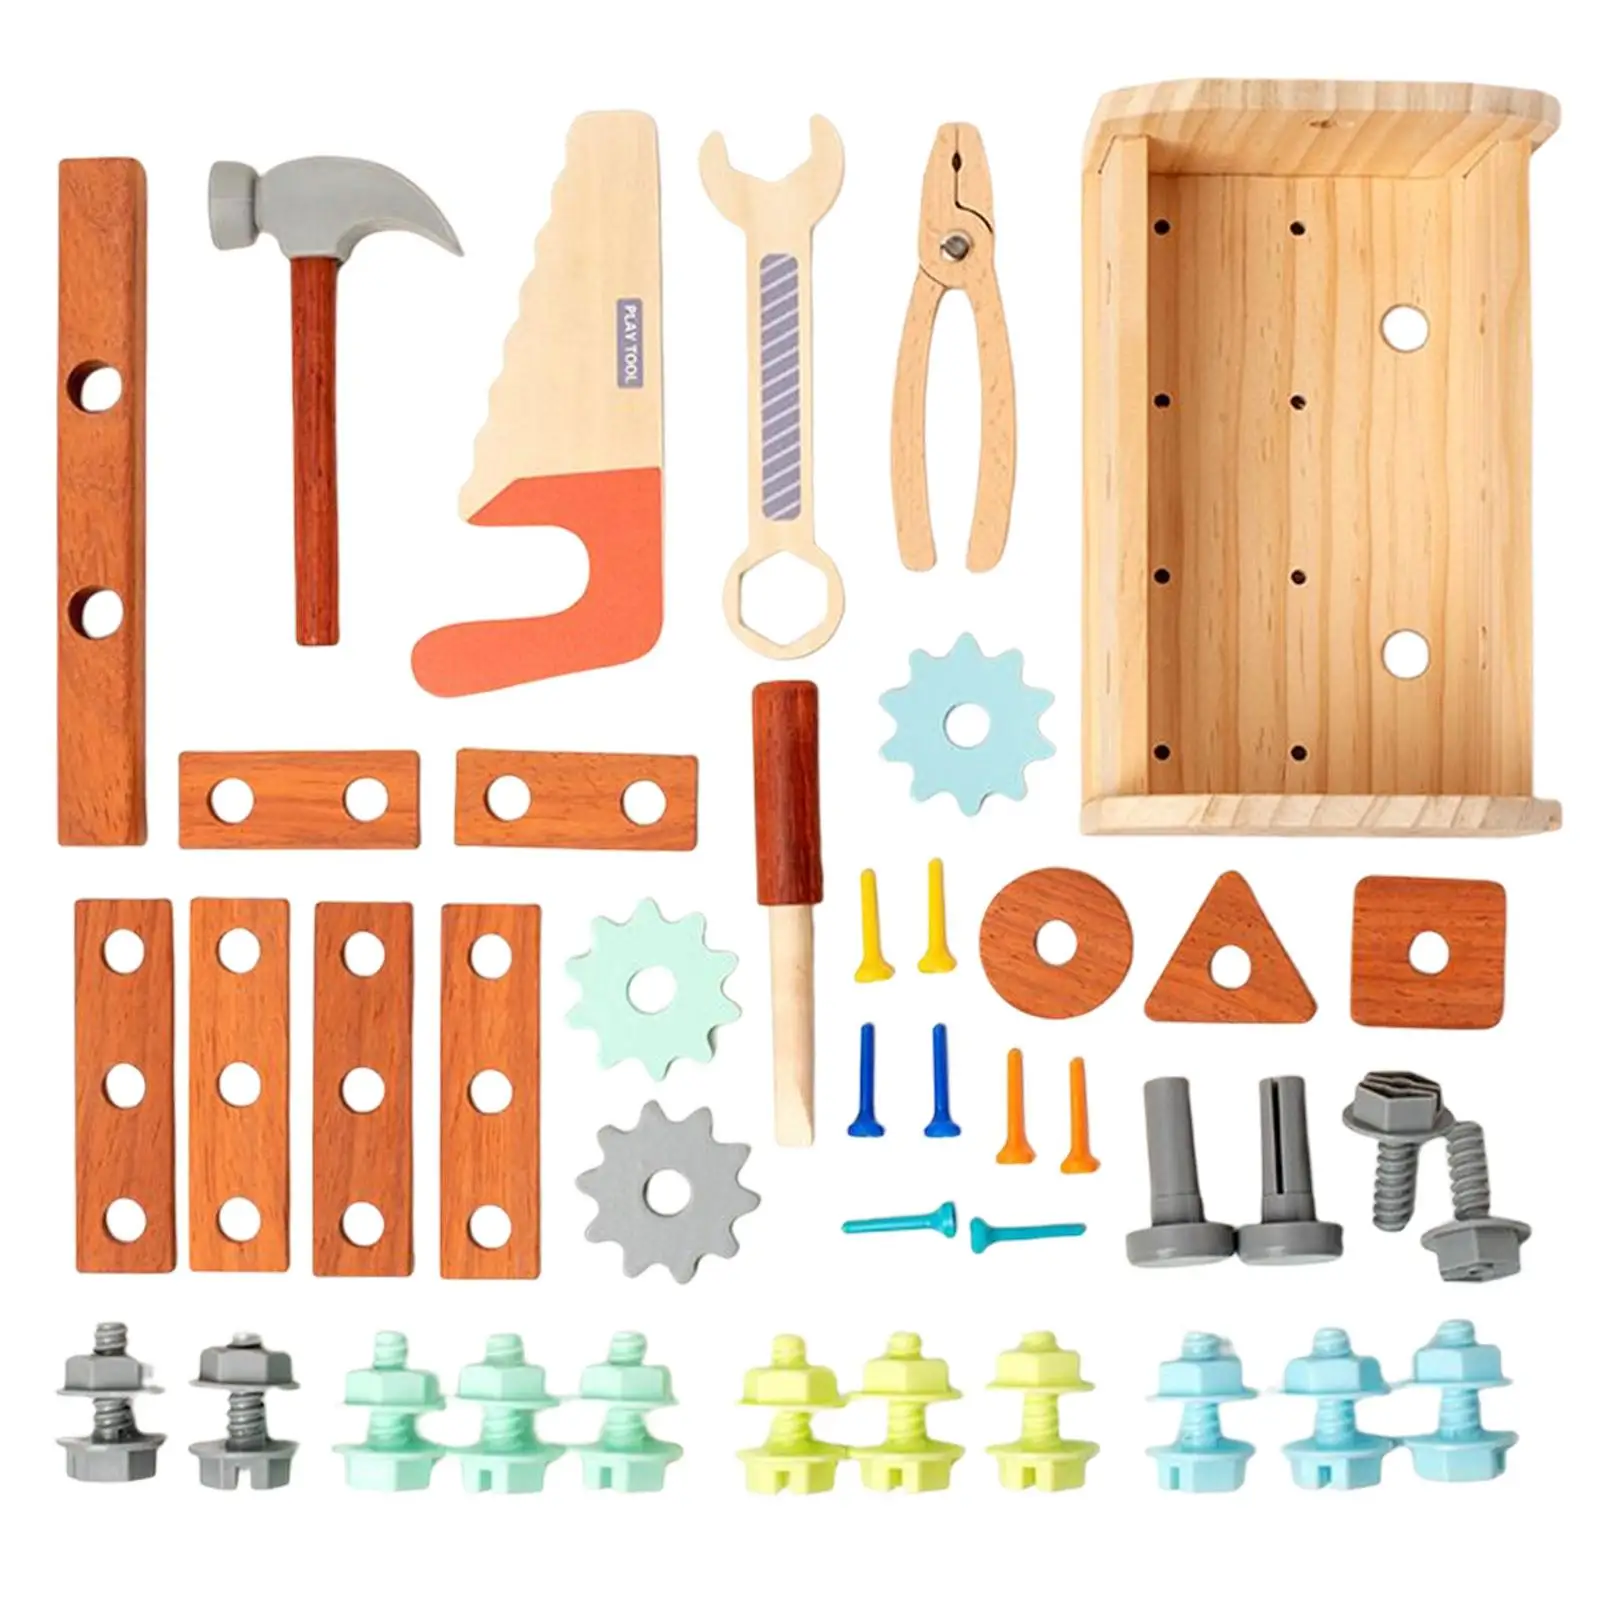 Wood Tool Set for Kids Nuts and Bolts Screw Driver Toolbox Toolbox Toy Wooden Construction Toy Wooden Toddler Tools Set for Kids